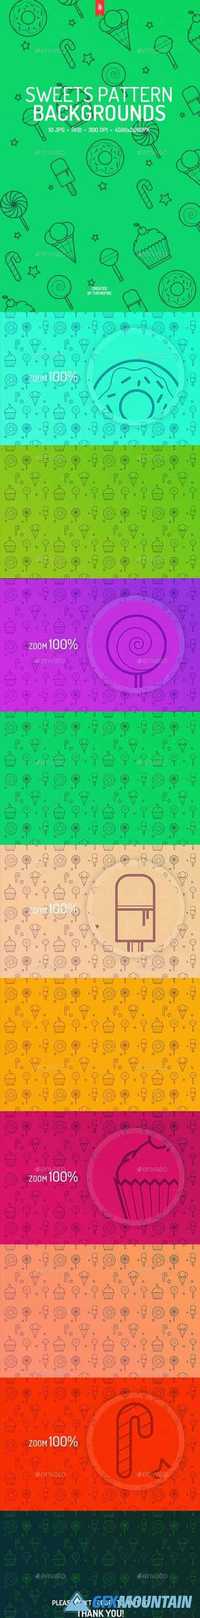 Sweets Pattern Backgrounds 19466982